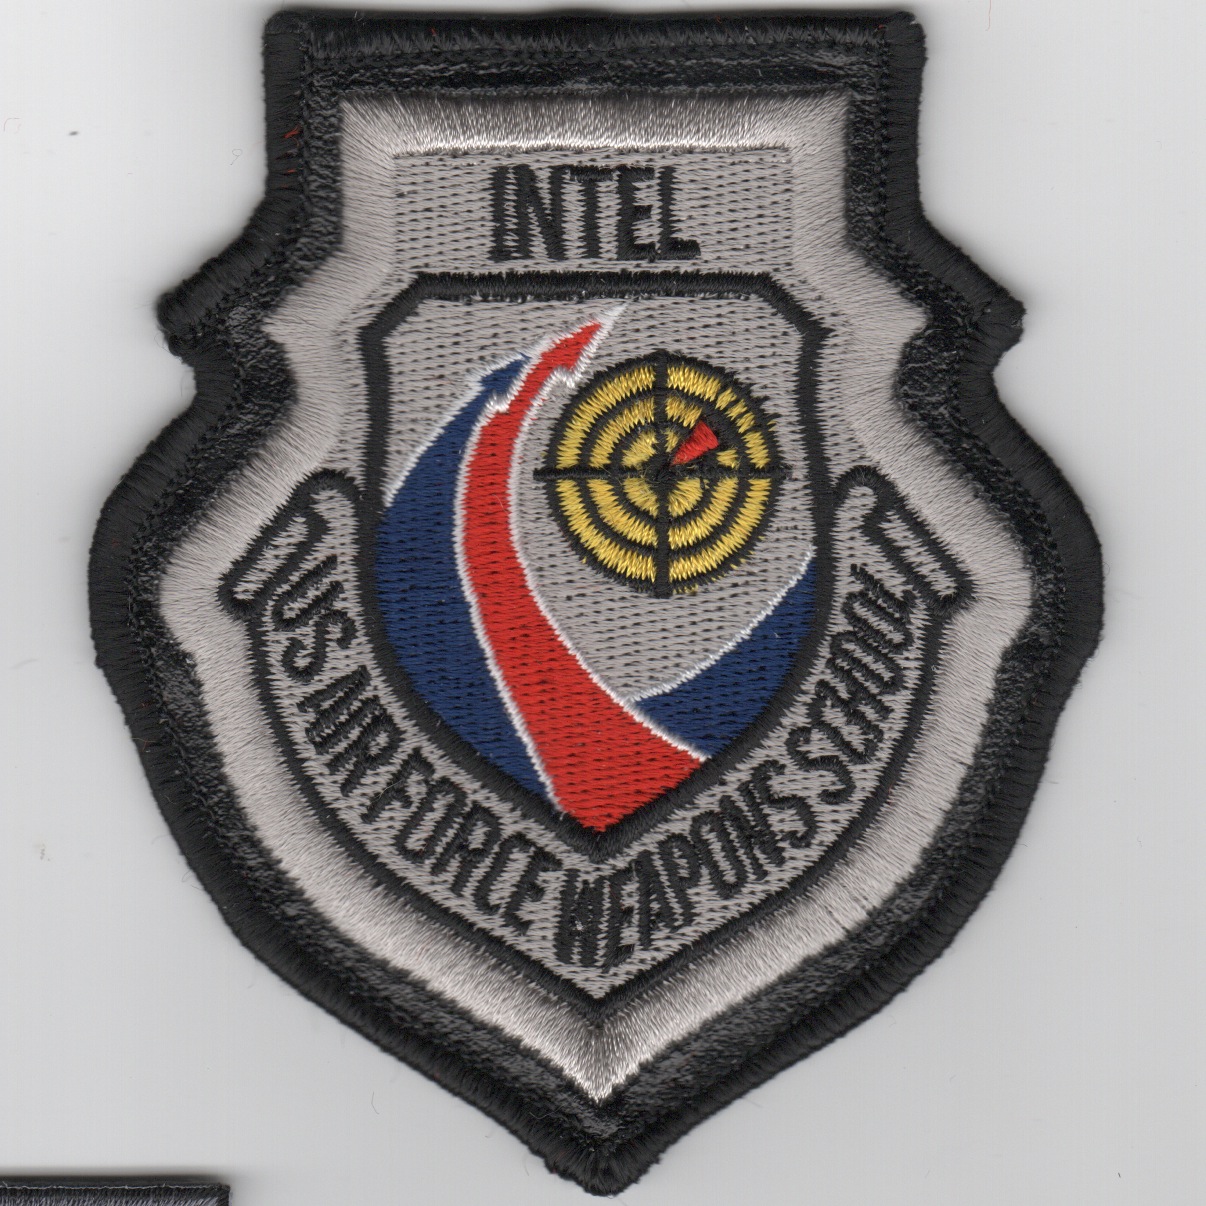 USAF WIC 'INTEL' Division Patch (LX)